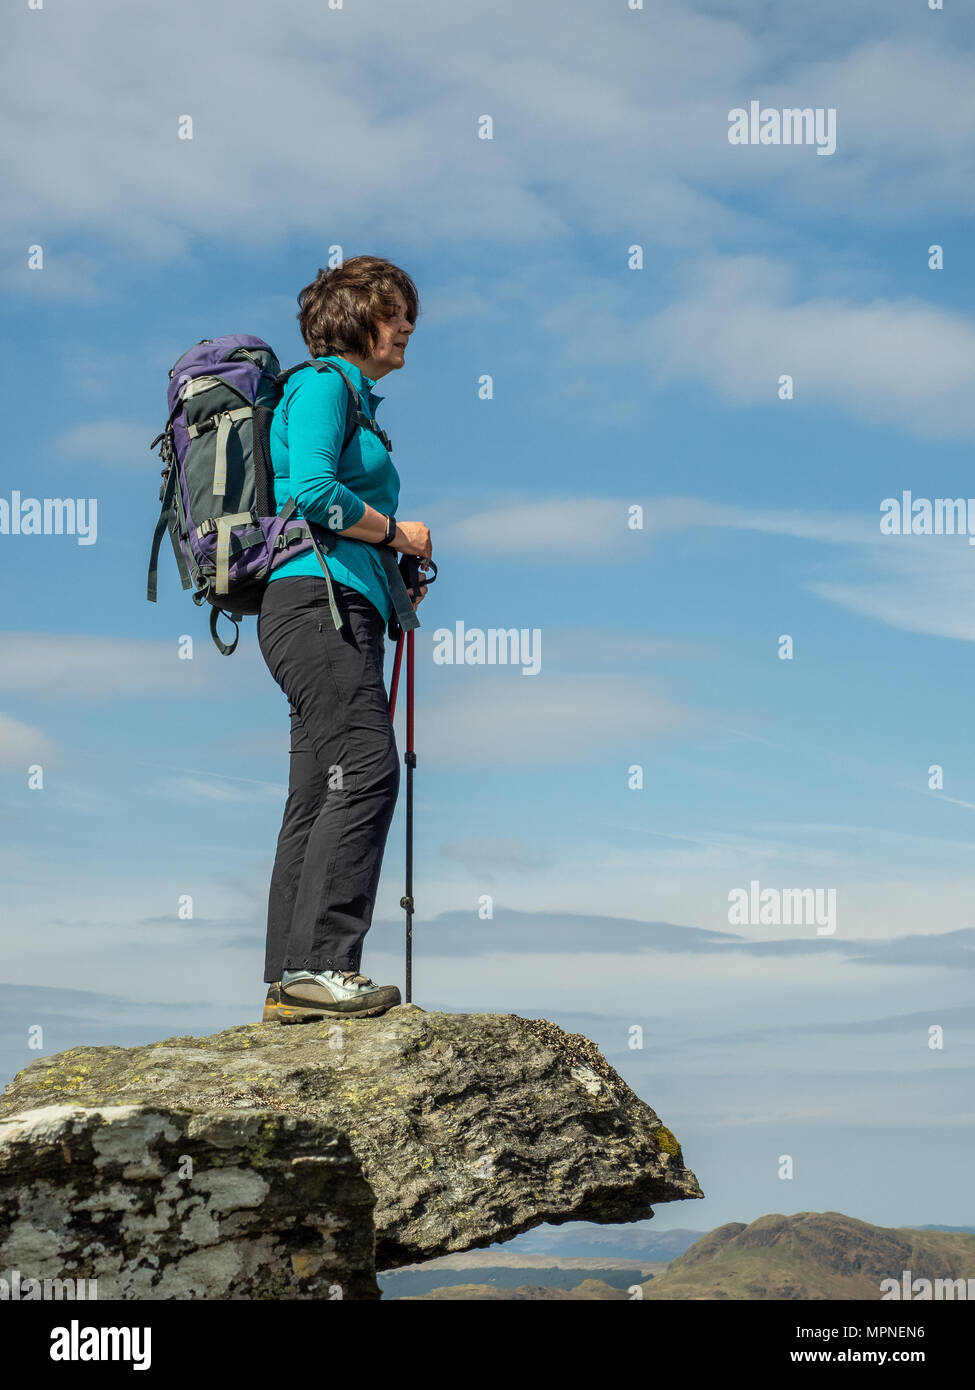 An active senior lady standing on rocks at the top of a mountain in the Scottish Highlands on a warm spring day Stock Photo